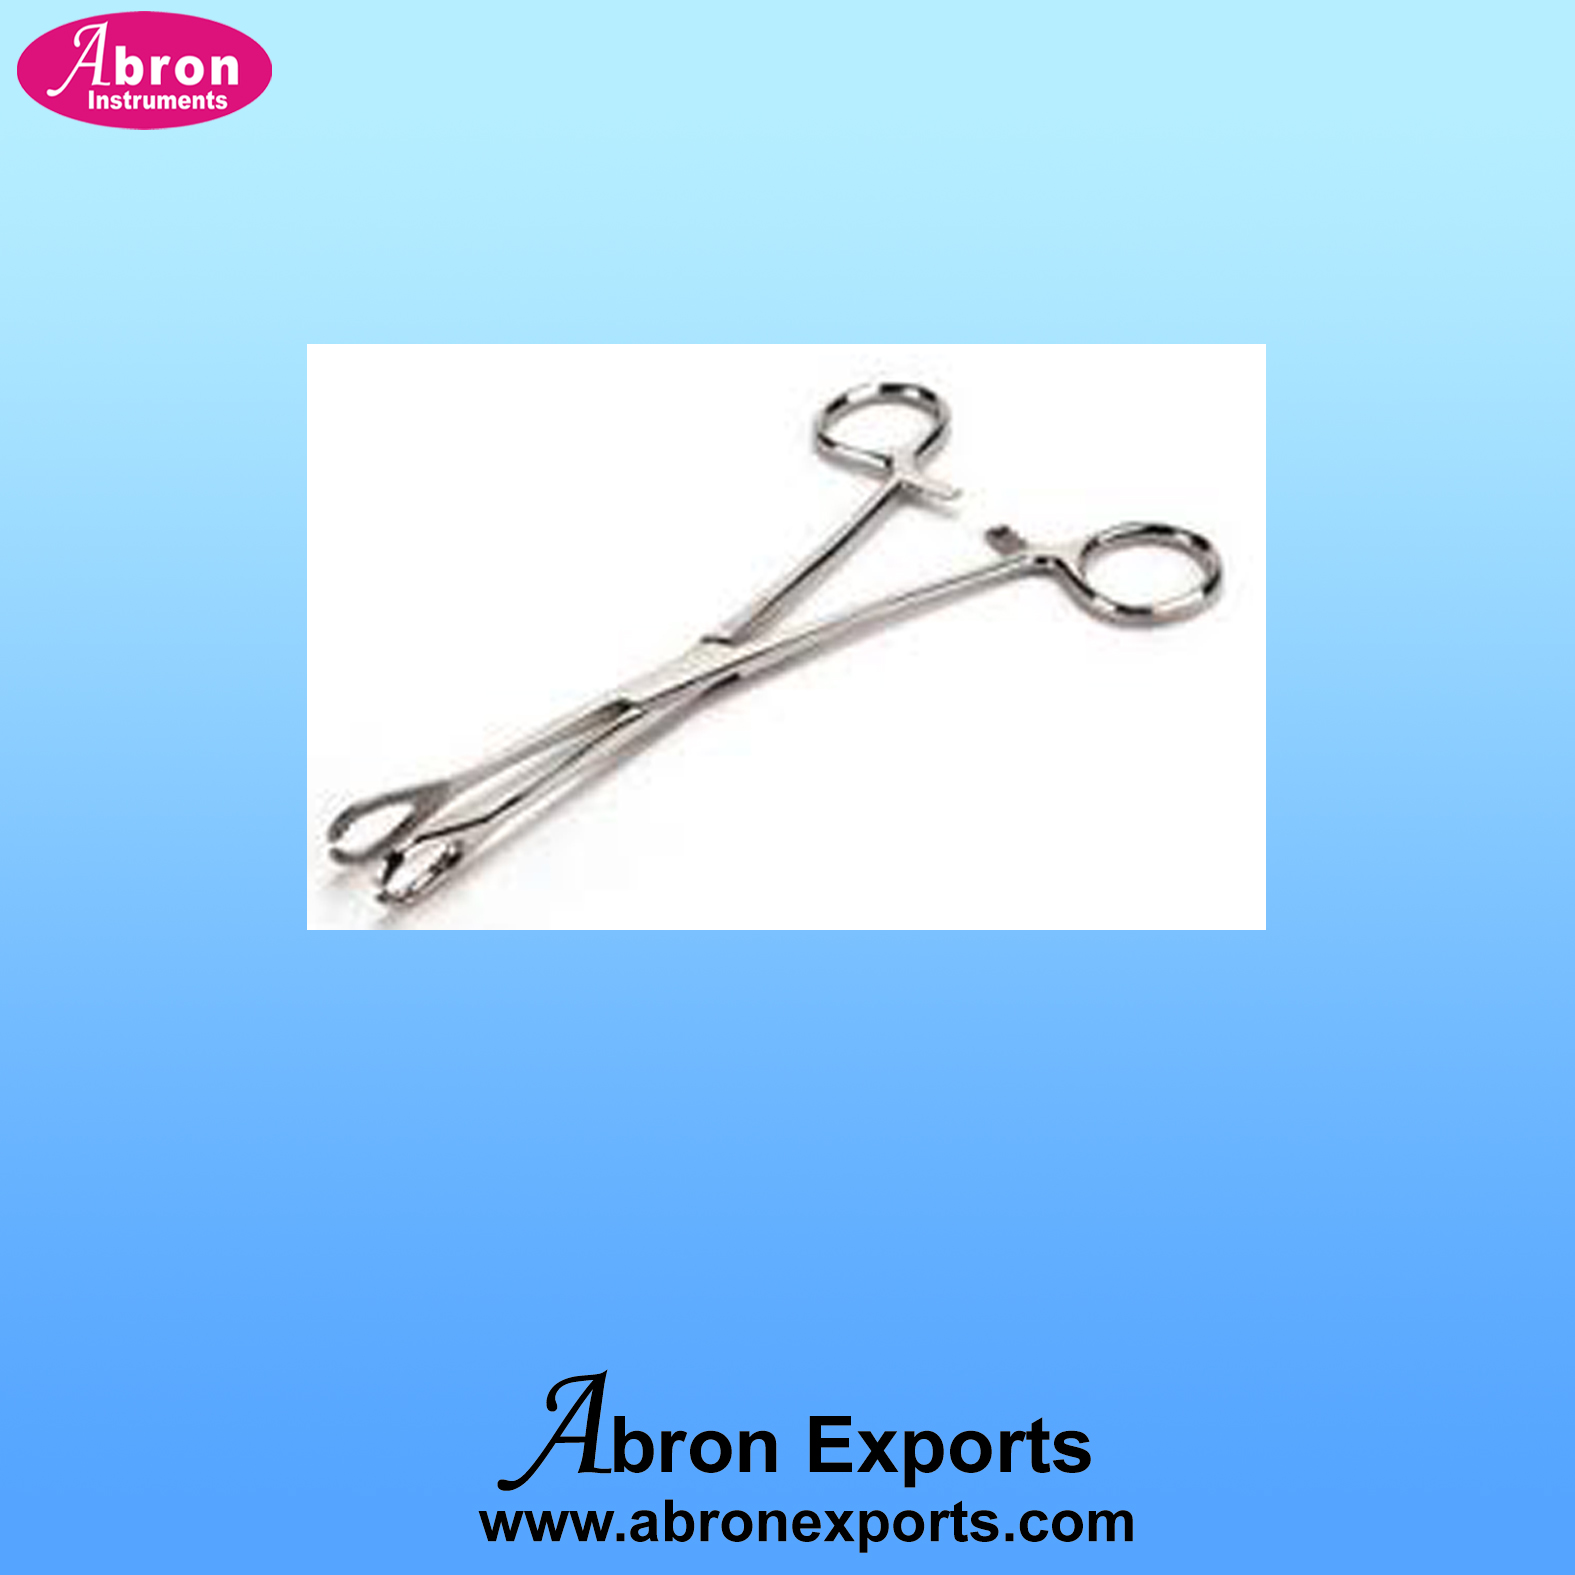 Surgical forceps sponge 6inch 150mm pack of 10 abron ABM-2620-17 